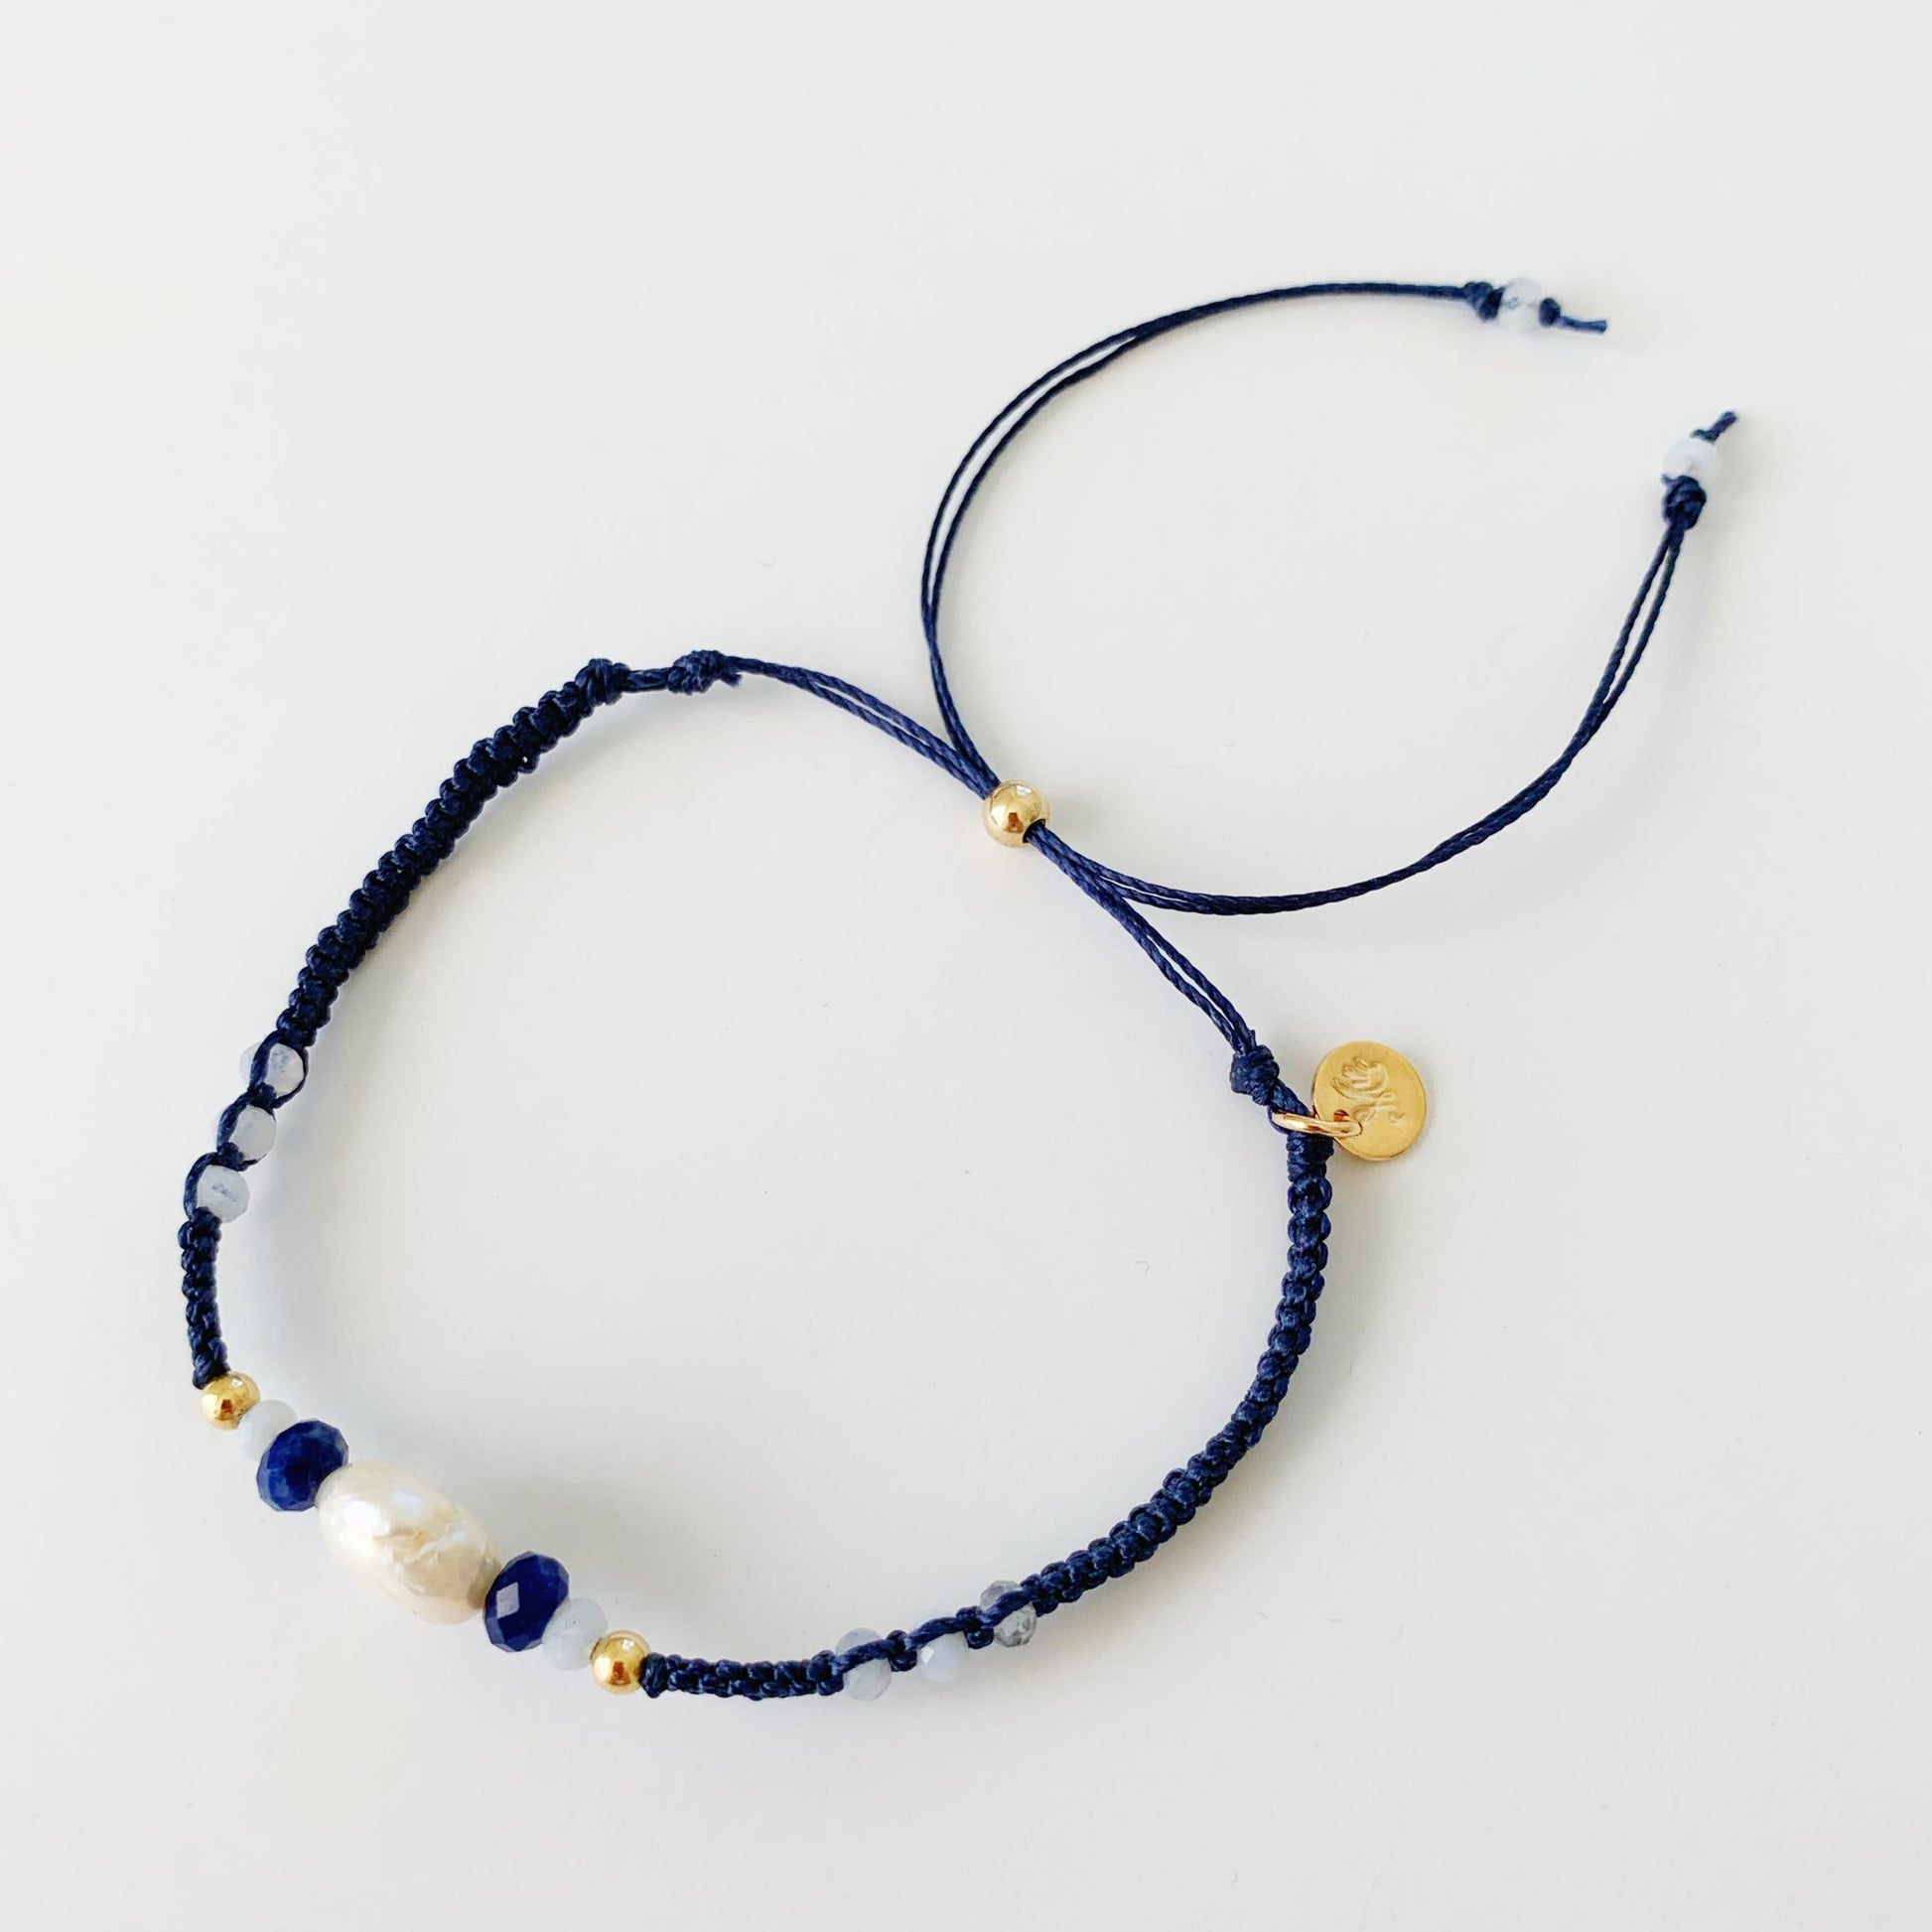 top view of the navy blue macrame friendship bracelet photographed on a white background